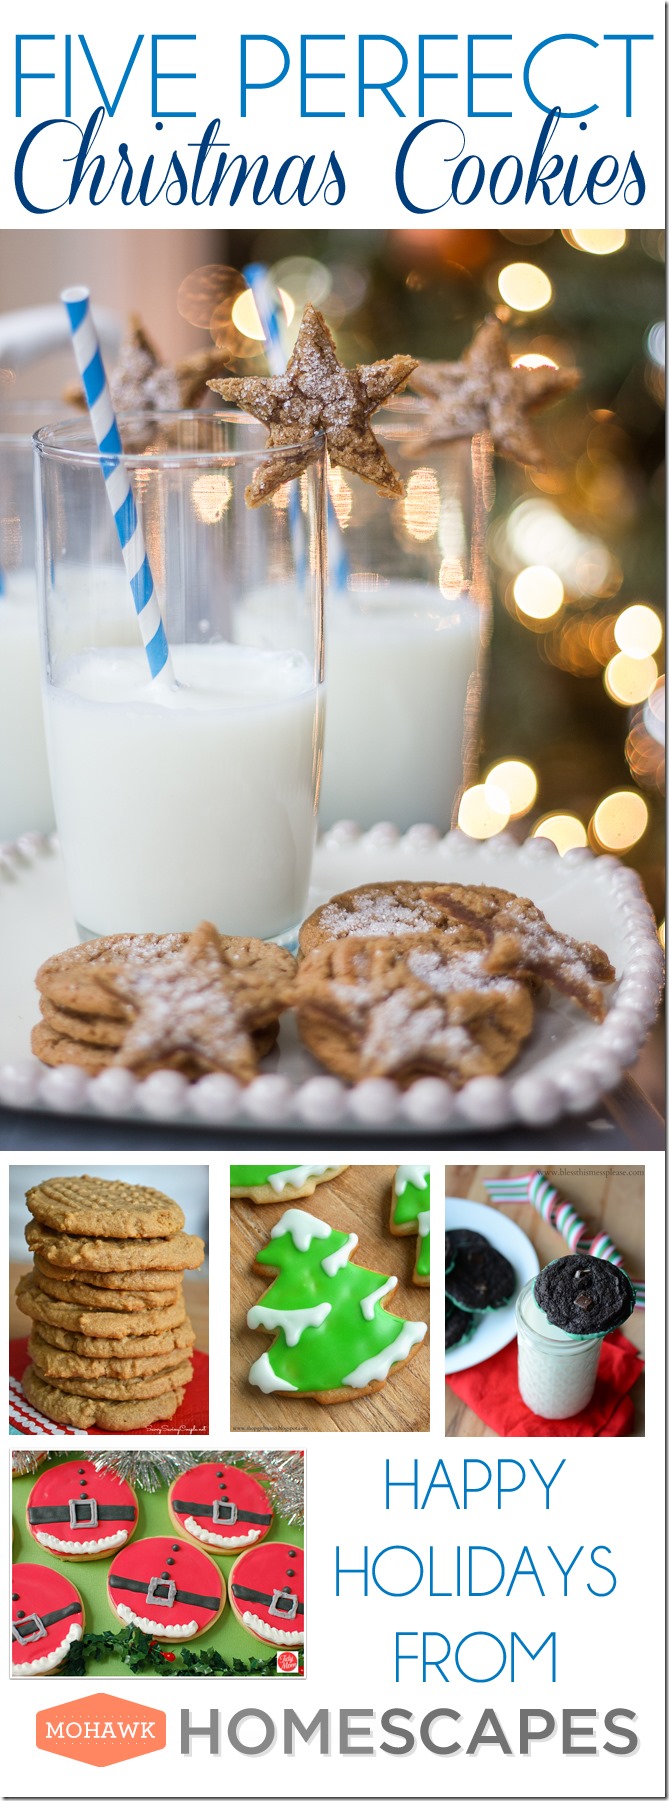 5 Perfect Christmas Cookies, 5 Perfect Christmas Cookies, Beth Bryan, unskinnyboppy, Mohawk Homescapes, holiday cookies